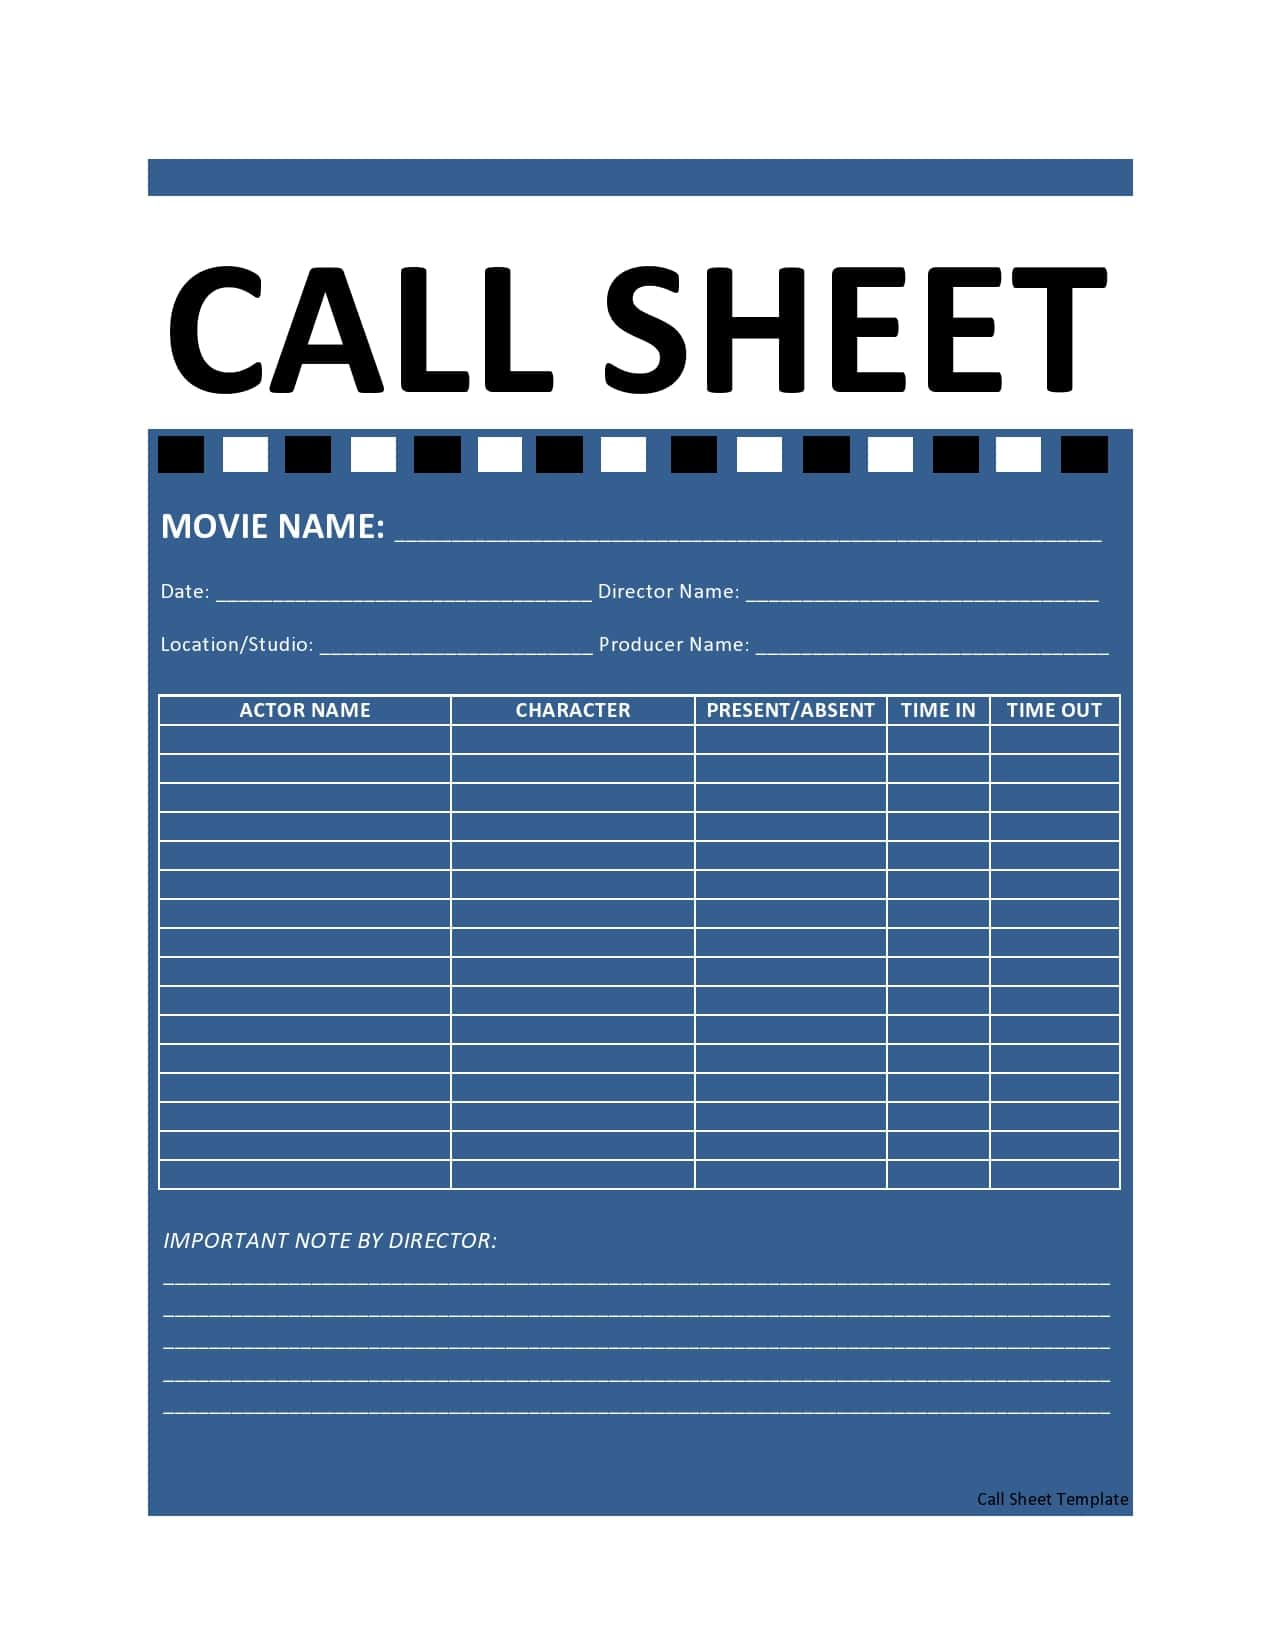 10 Simple Call Sheet Templates (FREE) - TemplateArchive Regarding Blank Call Sheet Template